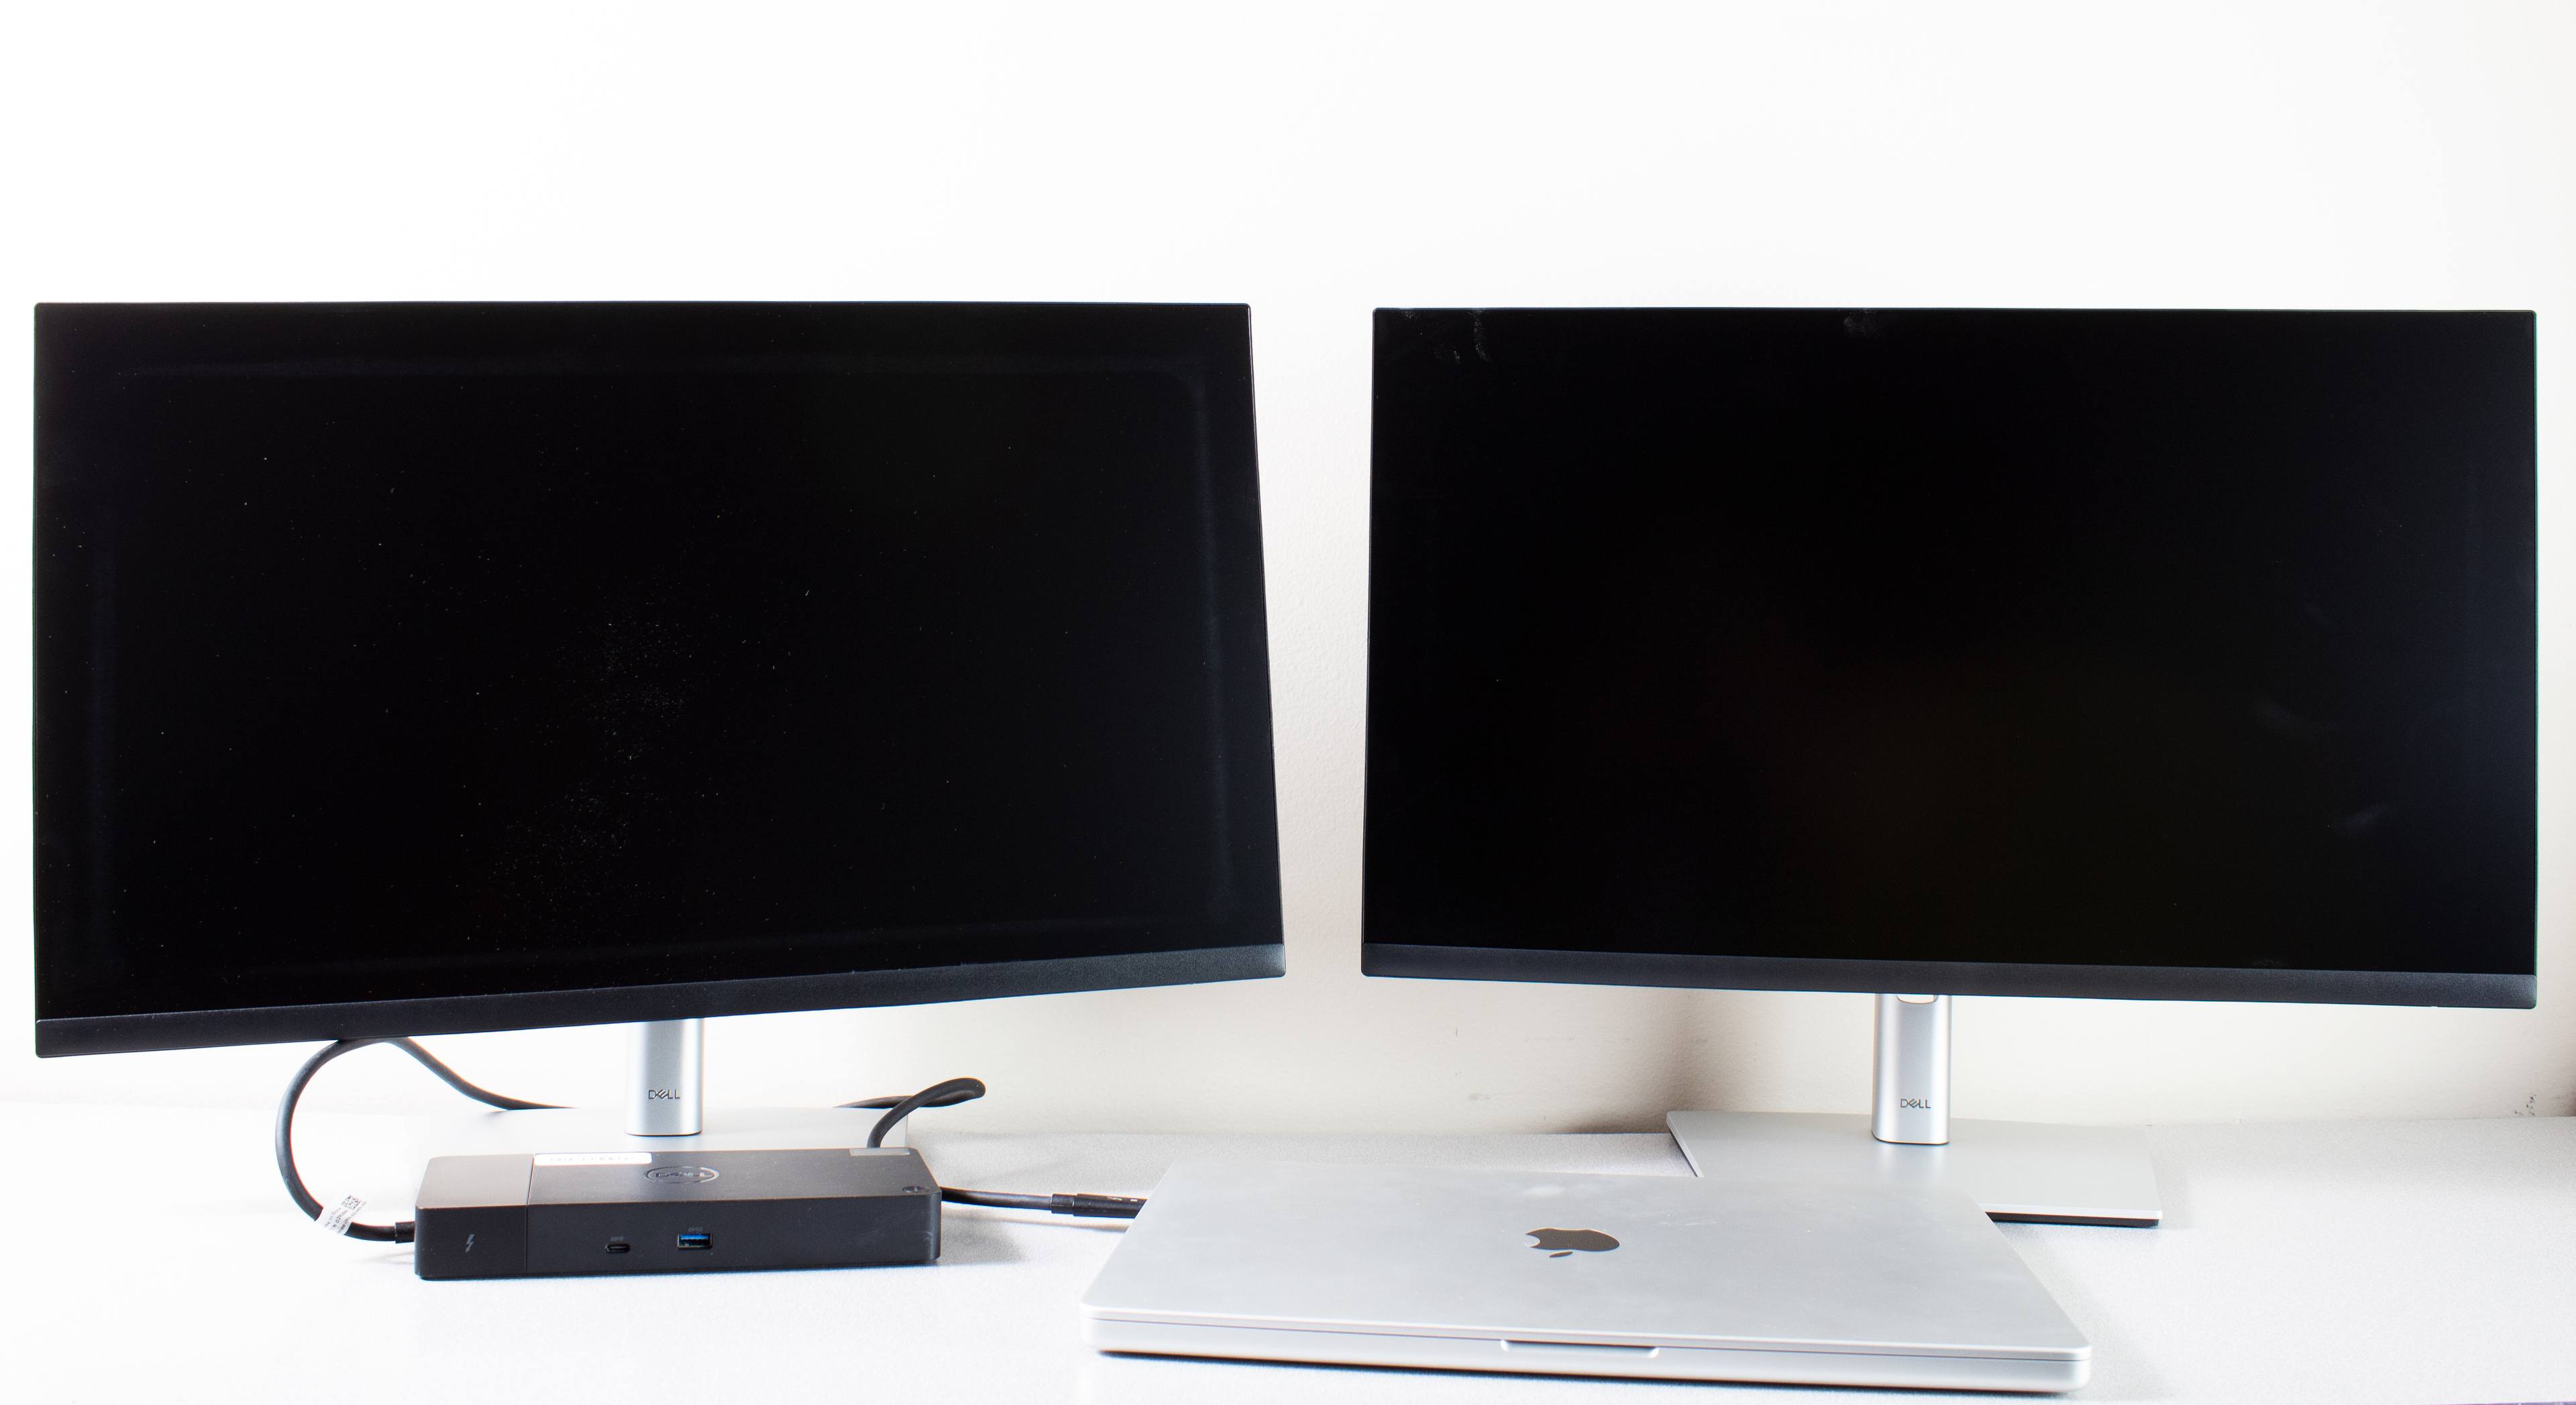 MacBook Pro laptop with two monitors